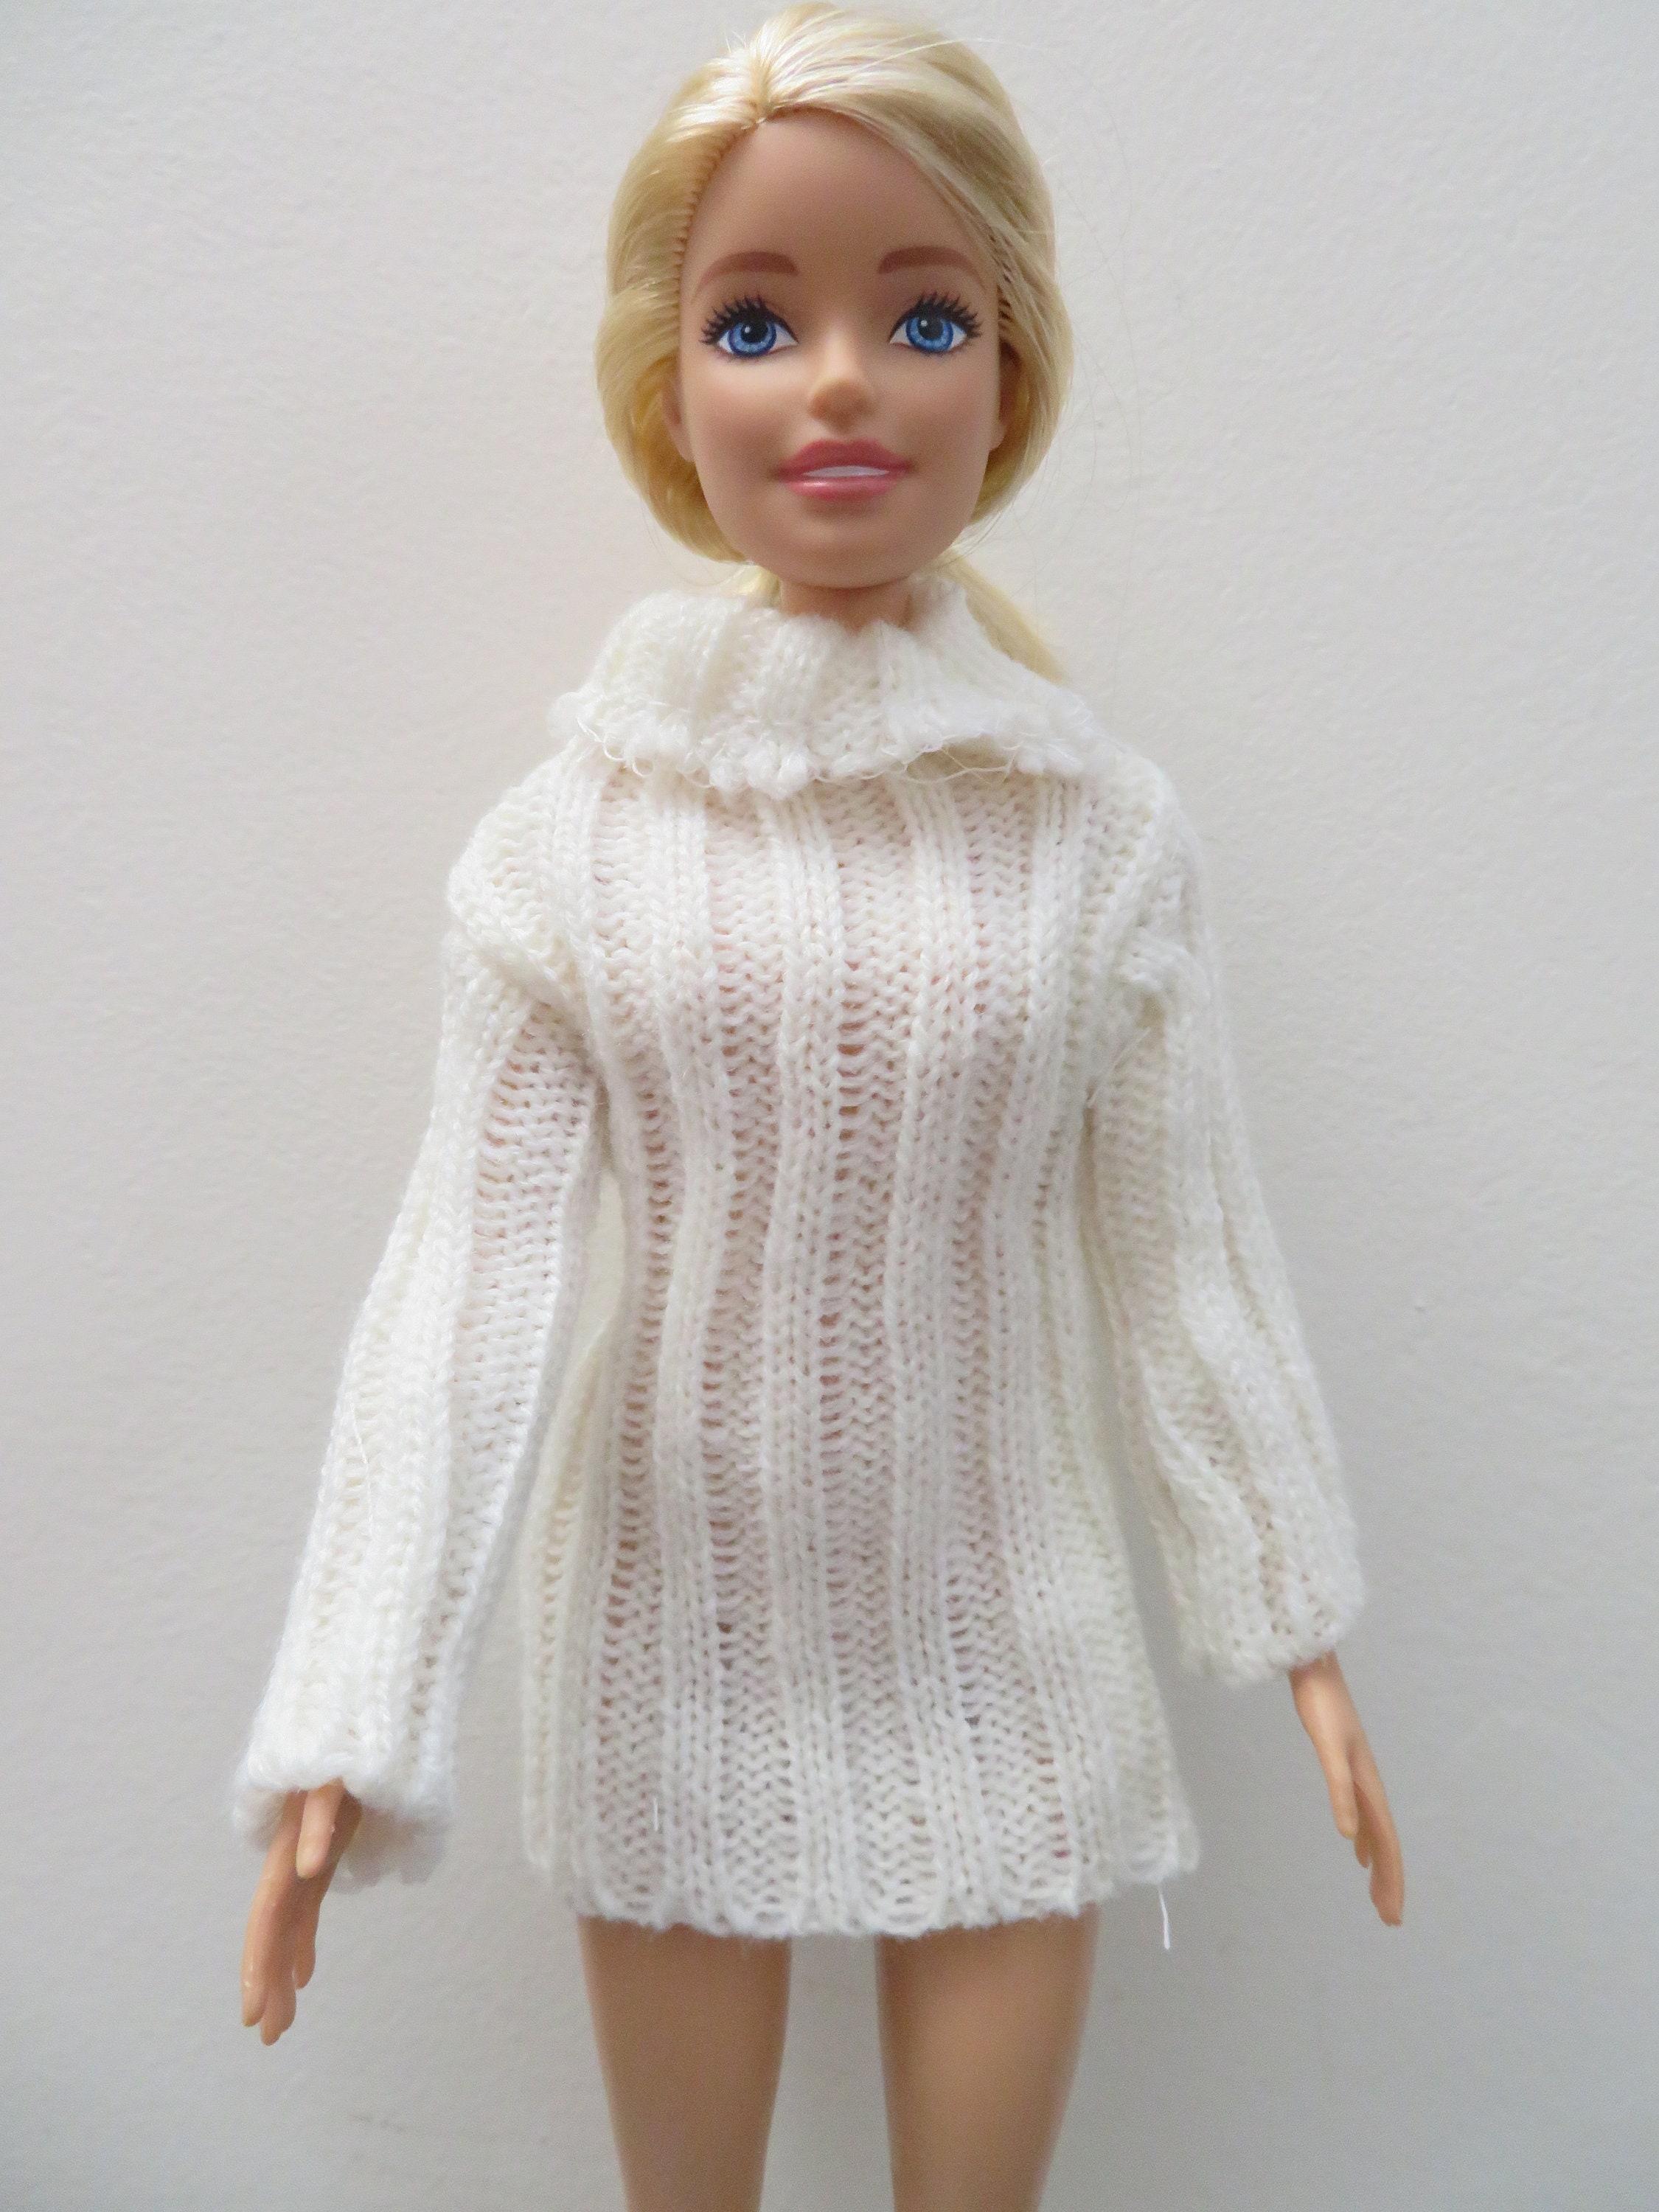 Barbie Sweater Barbie Clothes Sweater Barbie Doll Sweater | Etsy